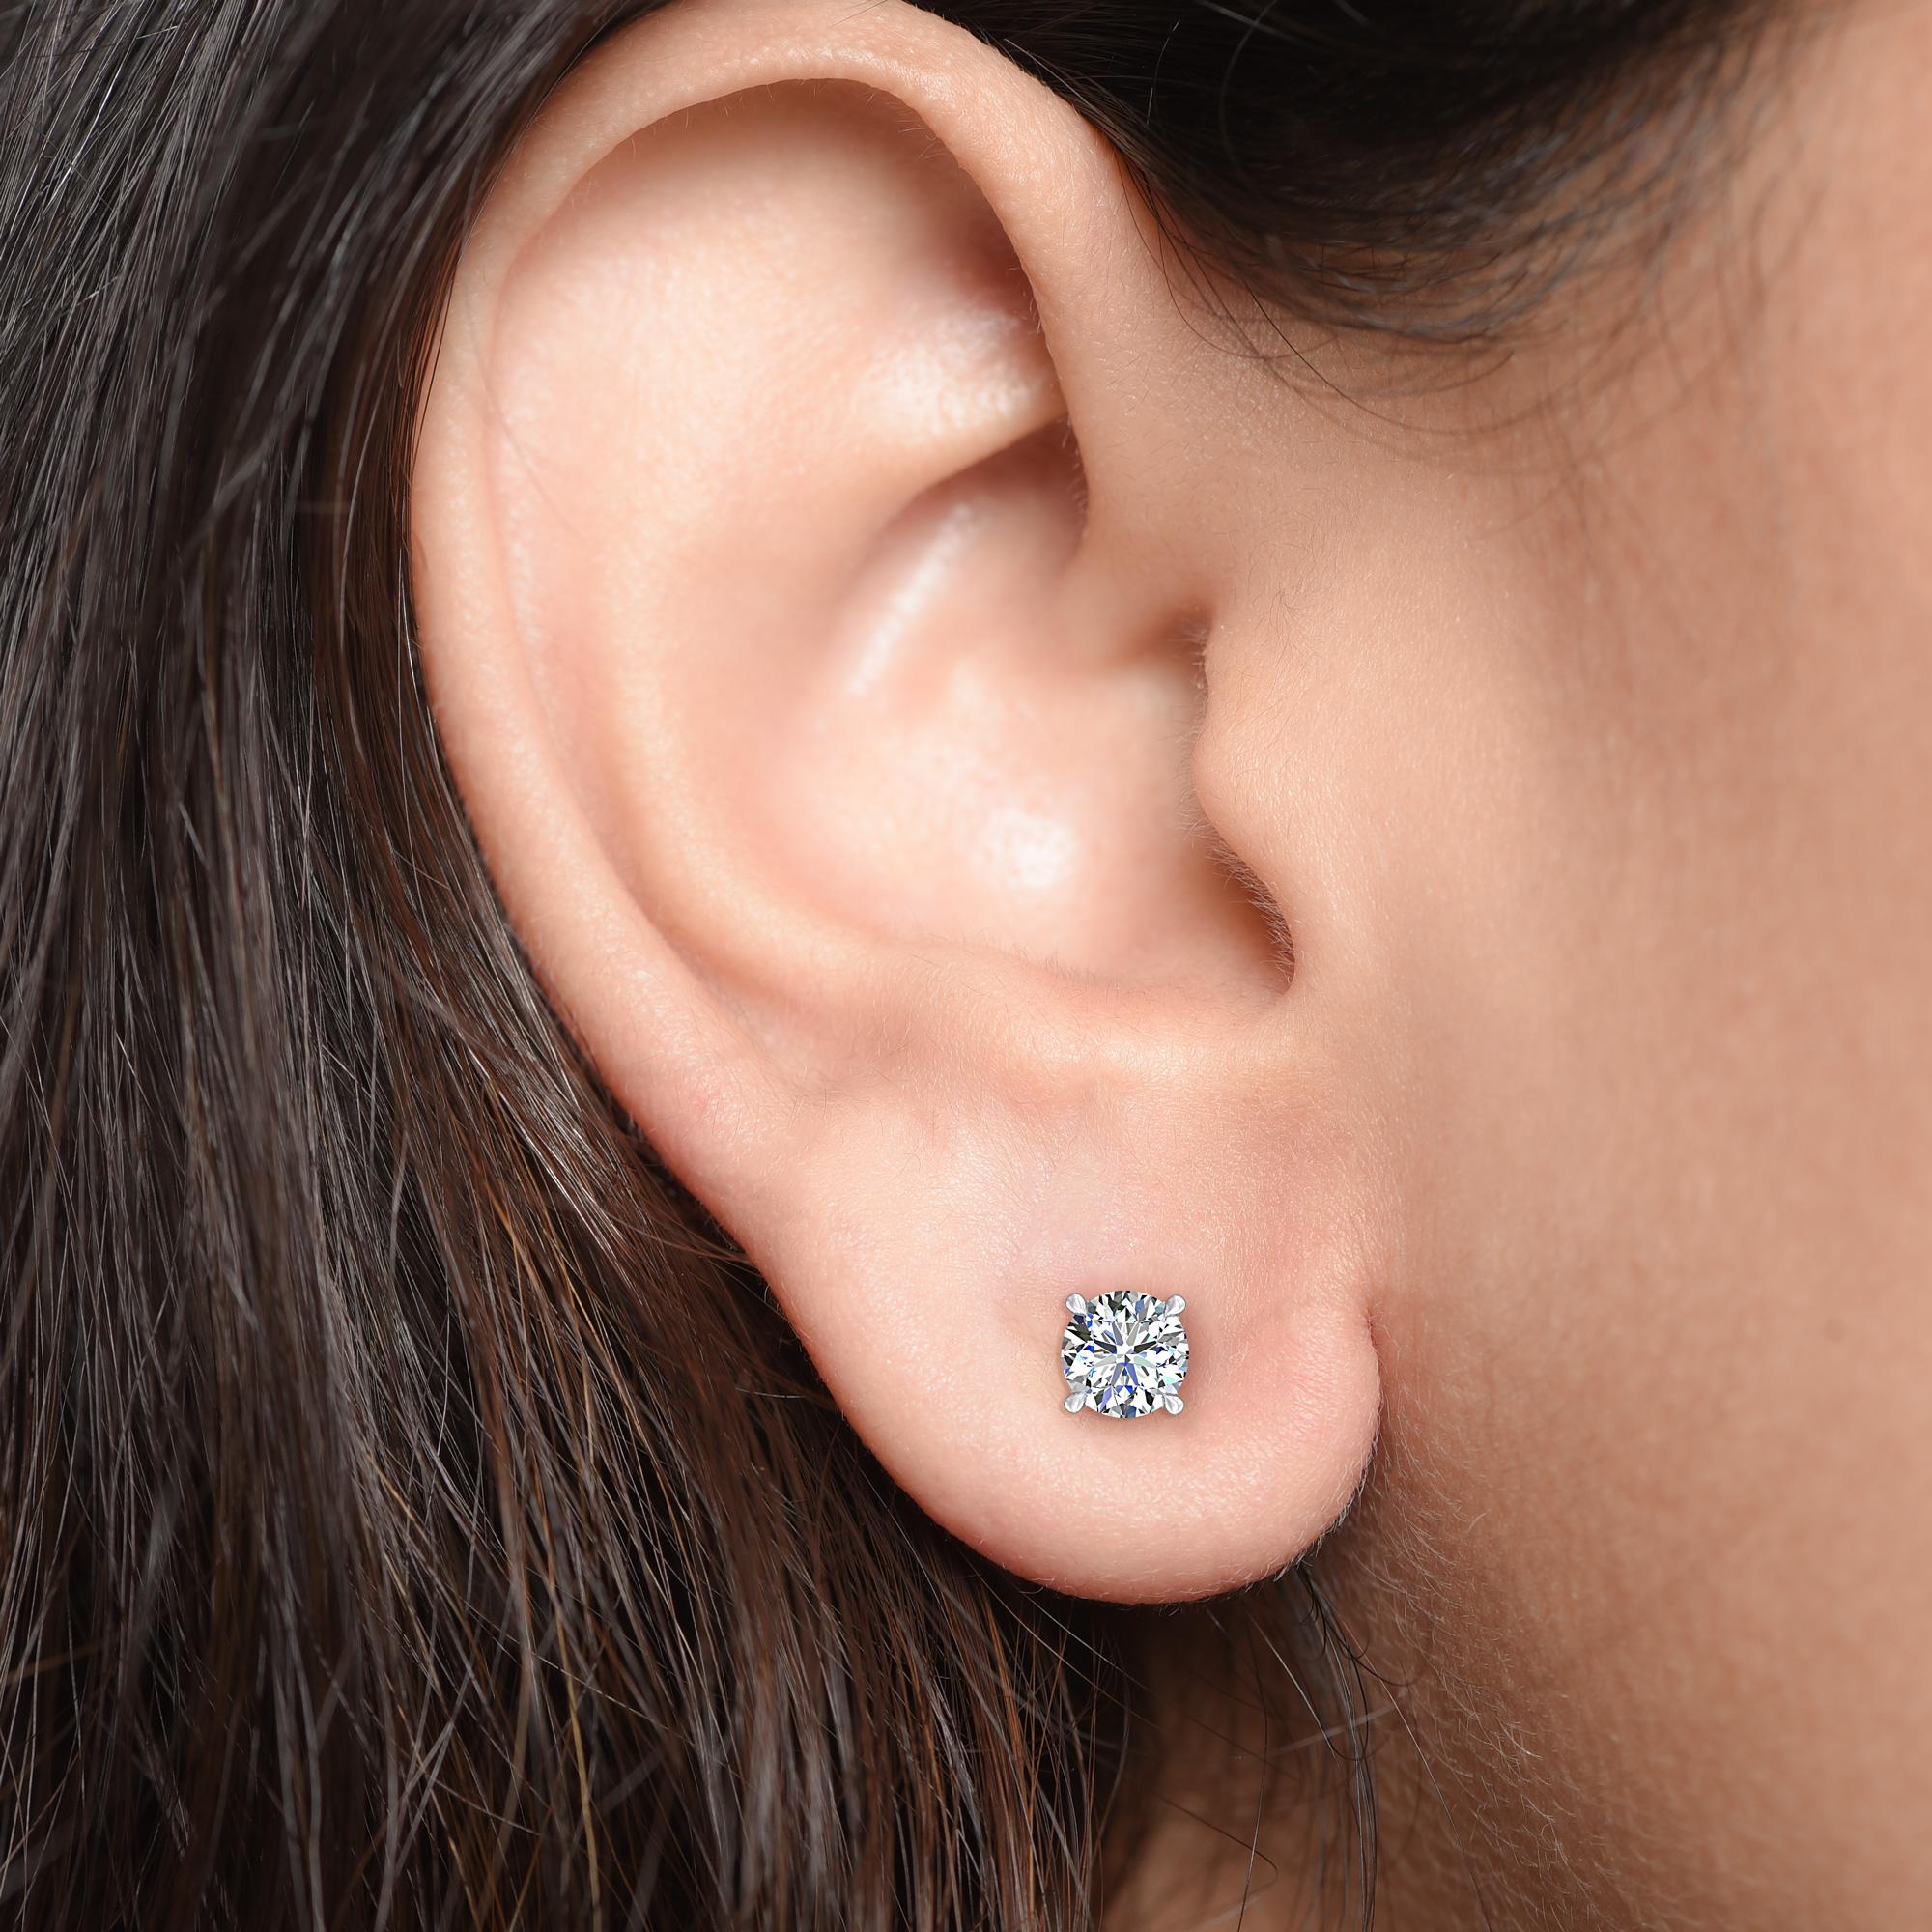 These classic GIA certified diamond studs showcase a pair of perfectly matched diamonds weighing total 0.68 carats. Crafted in 18-karat white gold, these four prong earrings are available in yellow and rose gold as well.

Perfect for gifting and for